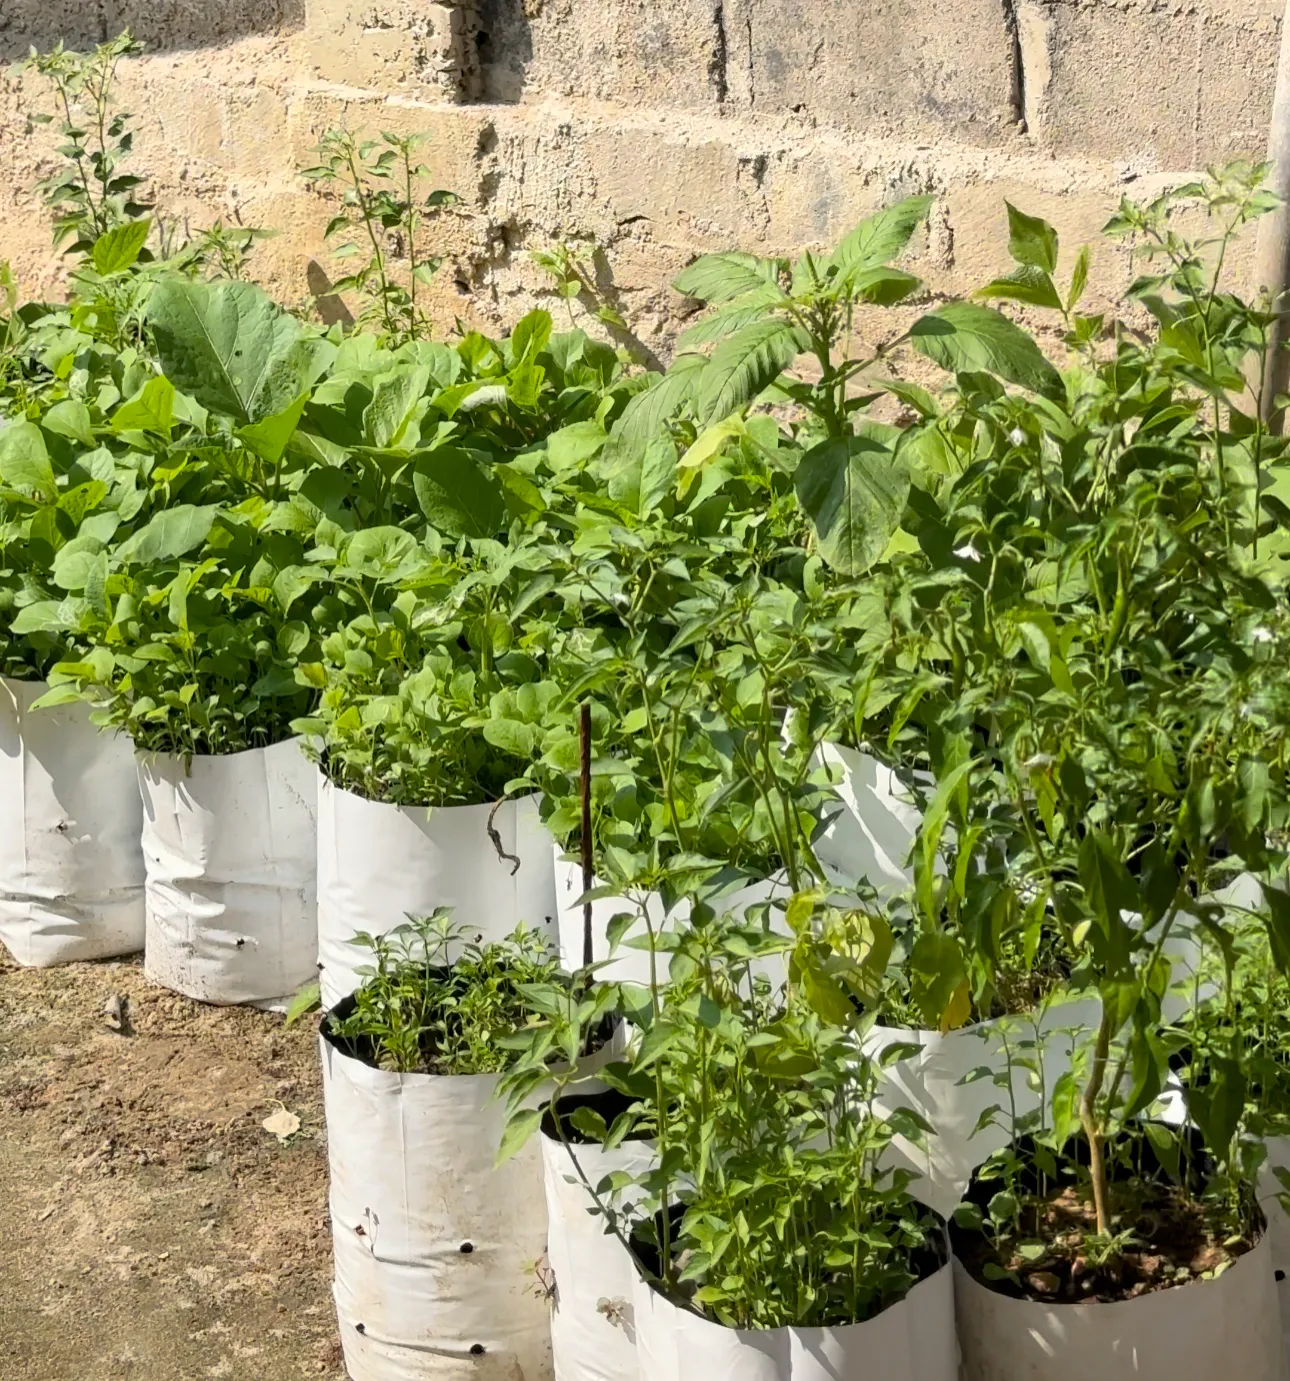 Plants potted in upcycled plastic bags at Dilmah Conservation